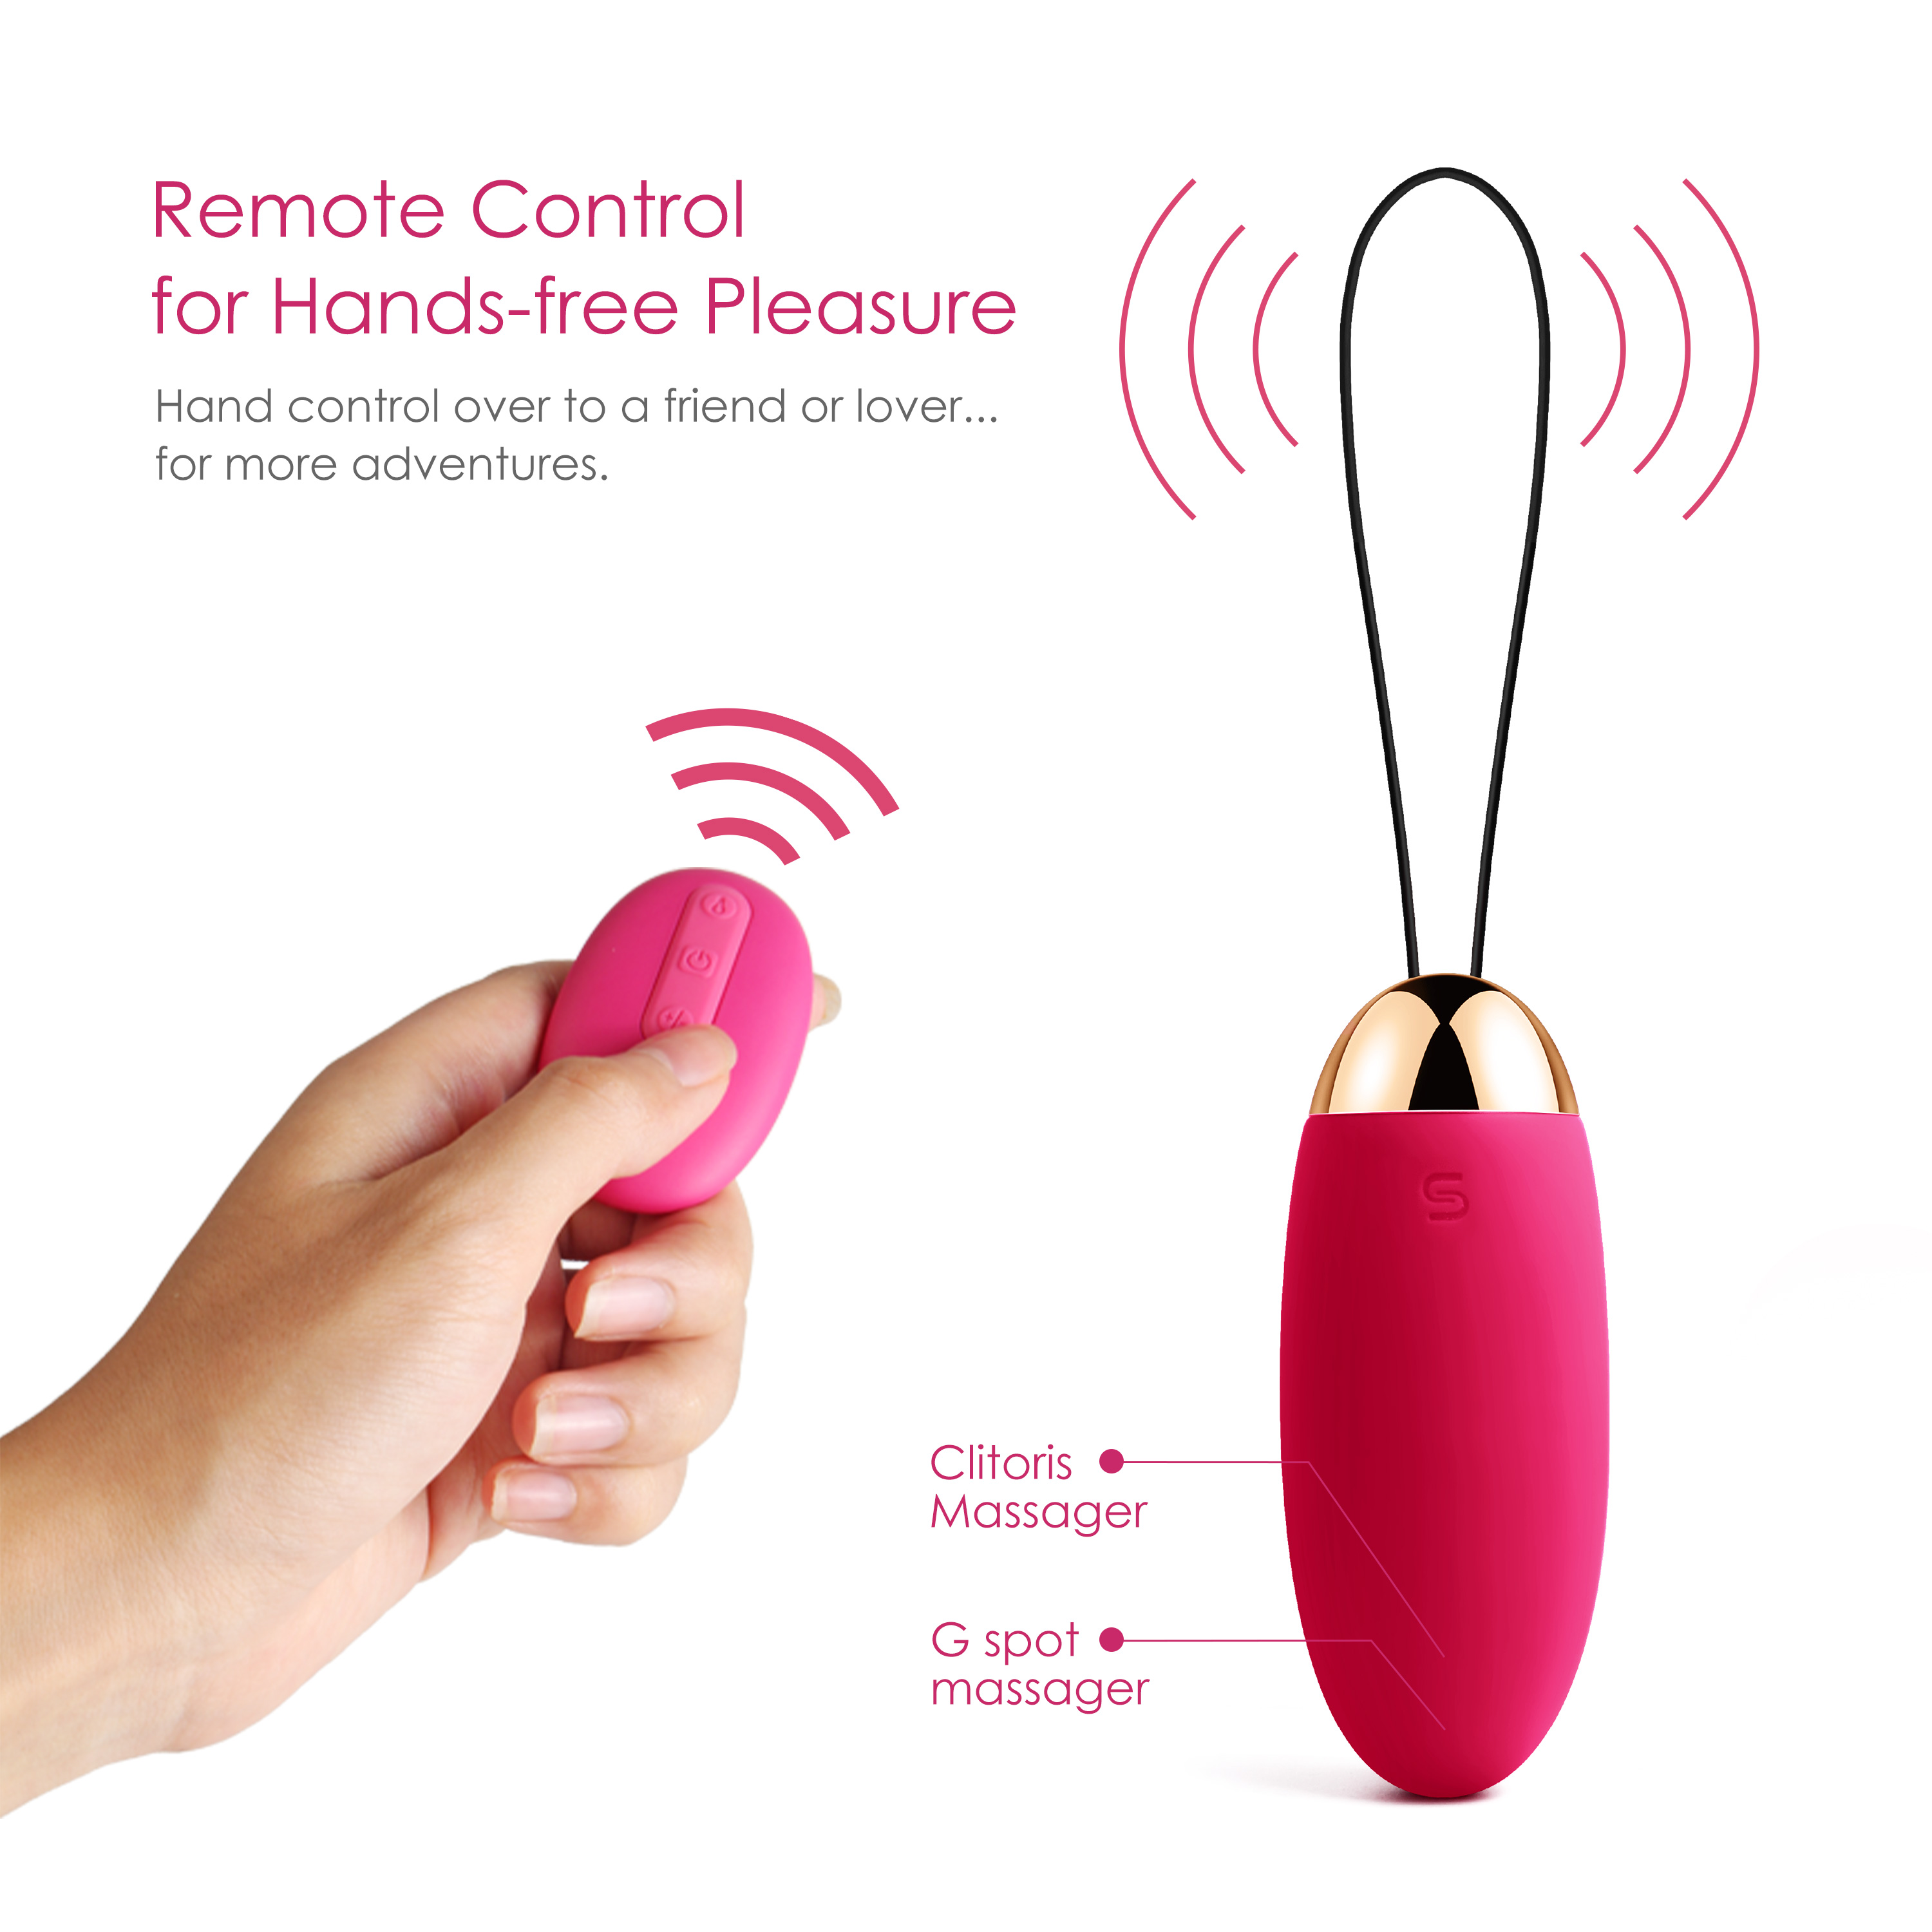 SVAKOM Elva Remote-Controlled Vibrator, Wearable Bullet Vibrator and Adult Sex Toys for Women - image 4 of 10